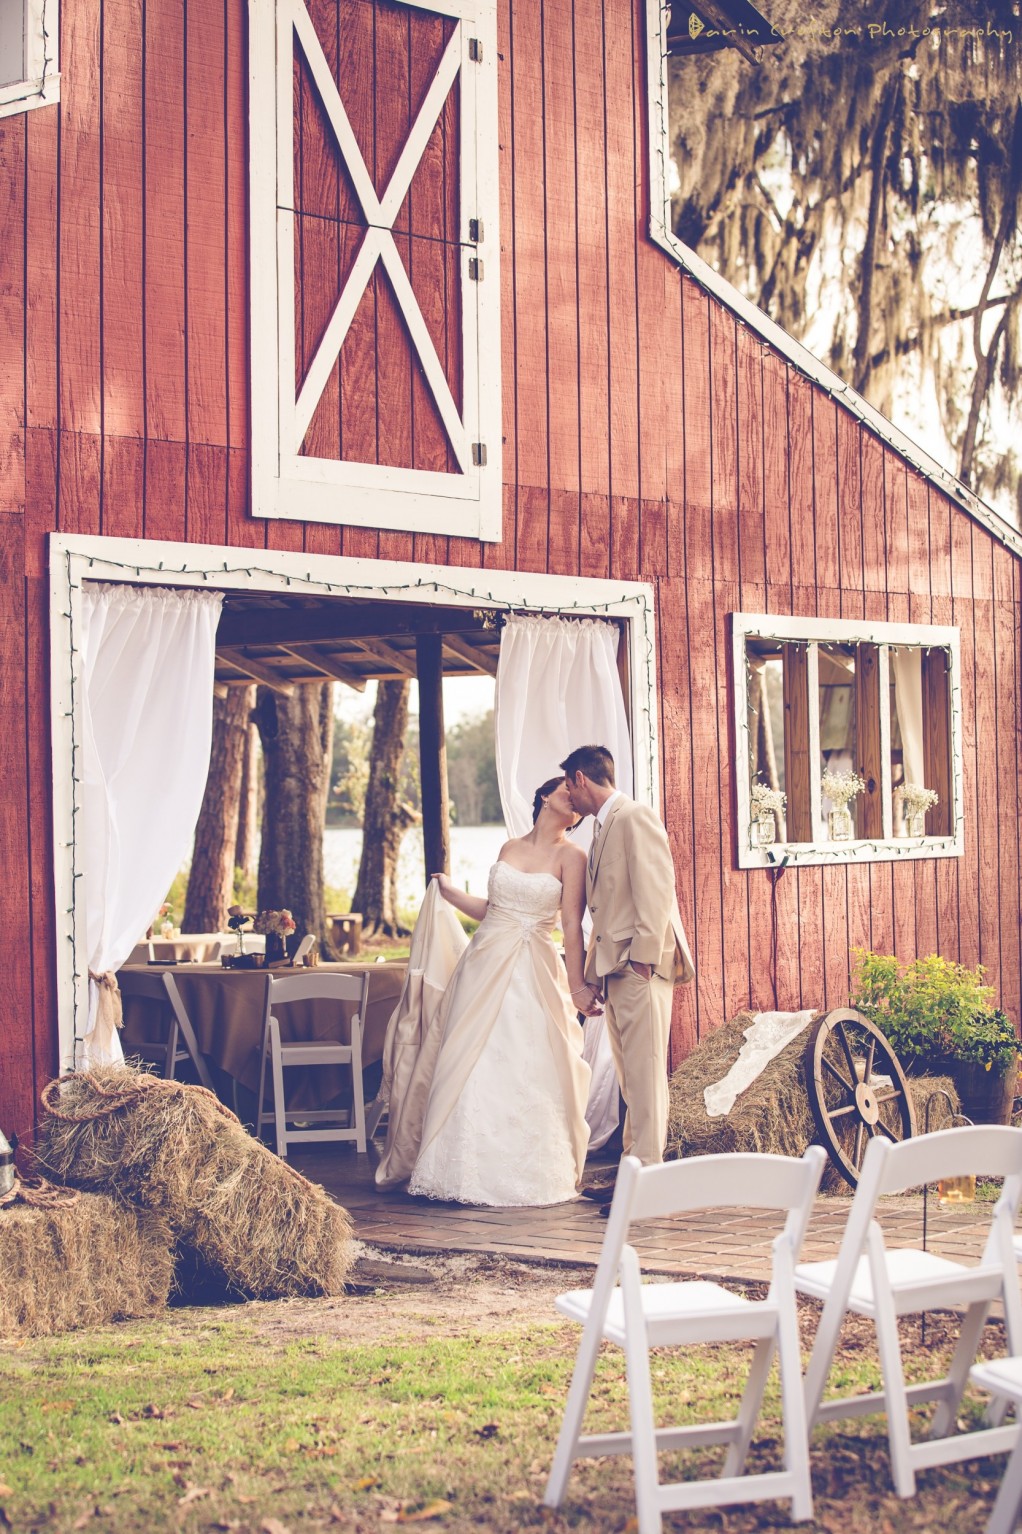 Old McMicky’s Farm Rustic Tampa Bay Wedding Venue 